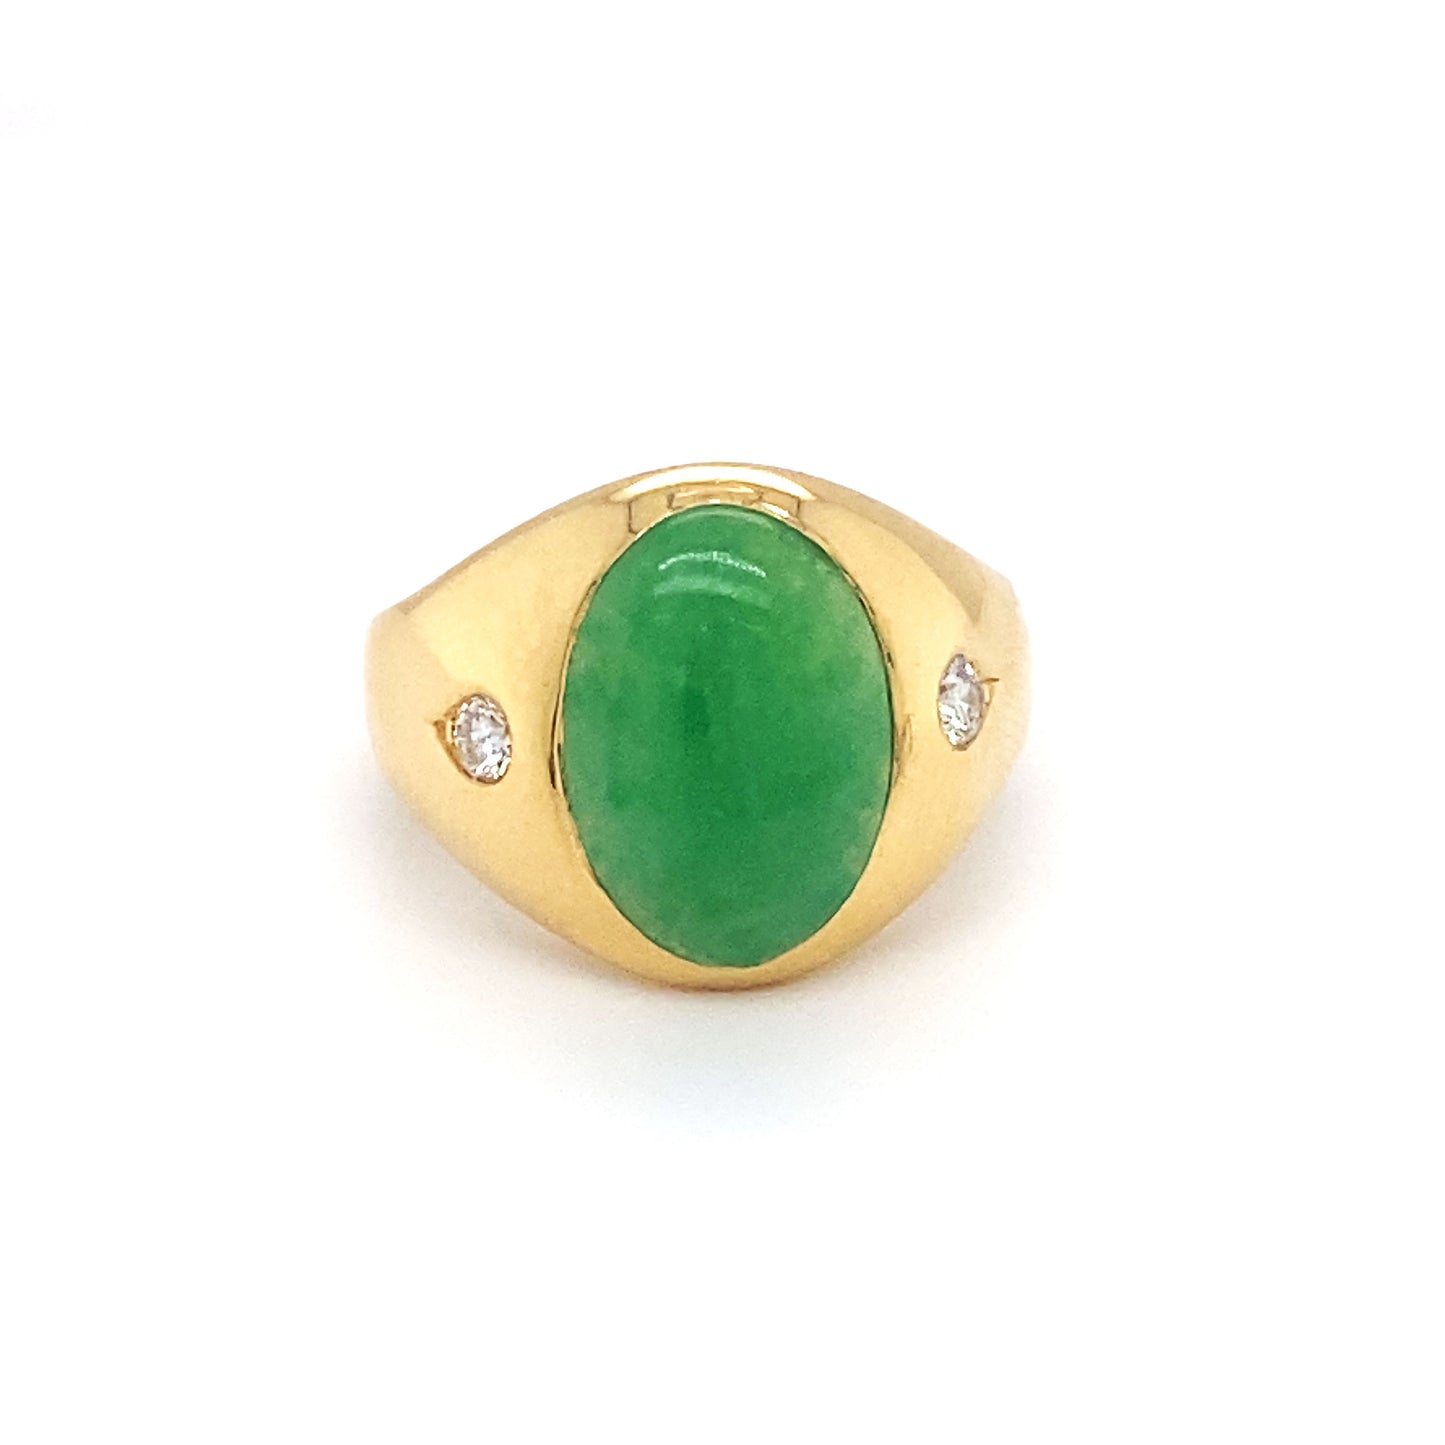 CDL Oval Jade and Diamond Ring in 18 Karat Gold